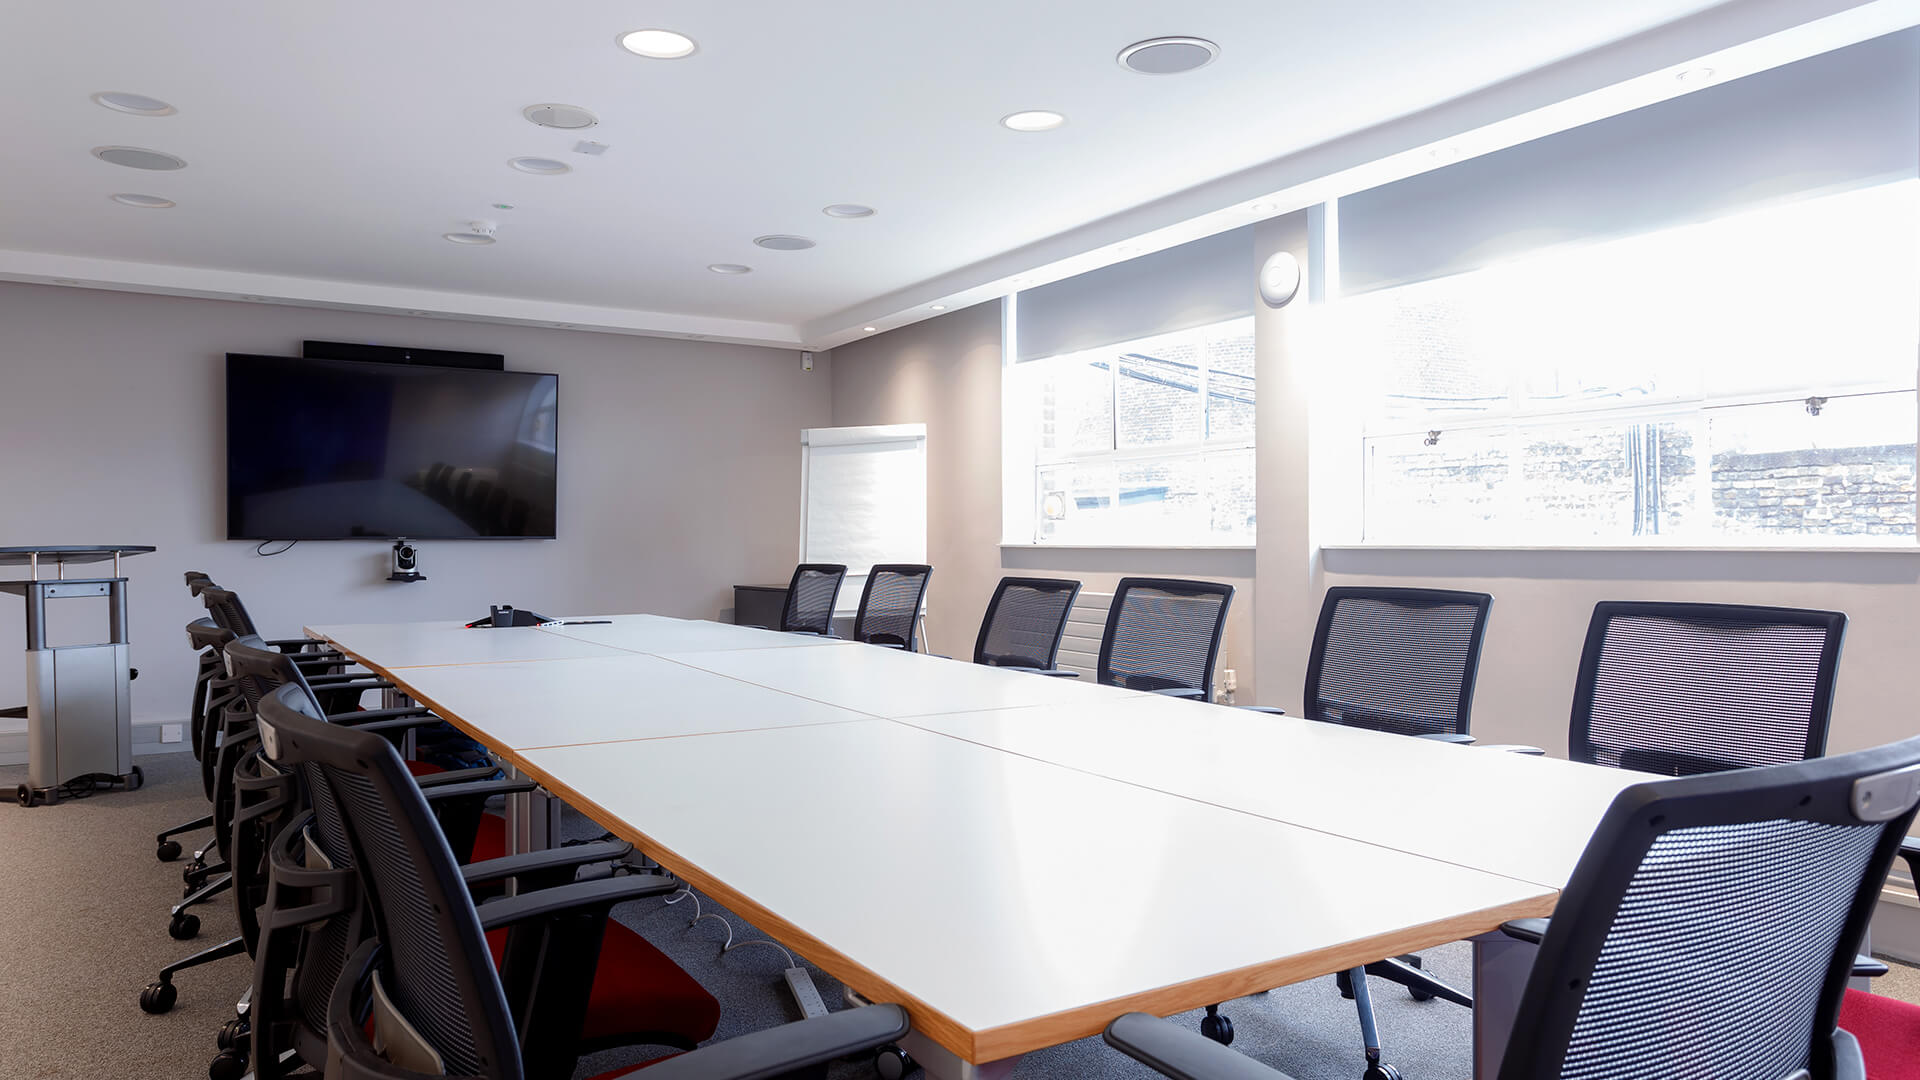 A large screen is mounted at the head of the table in a light-filled meeting space